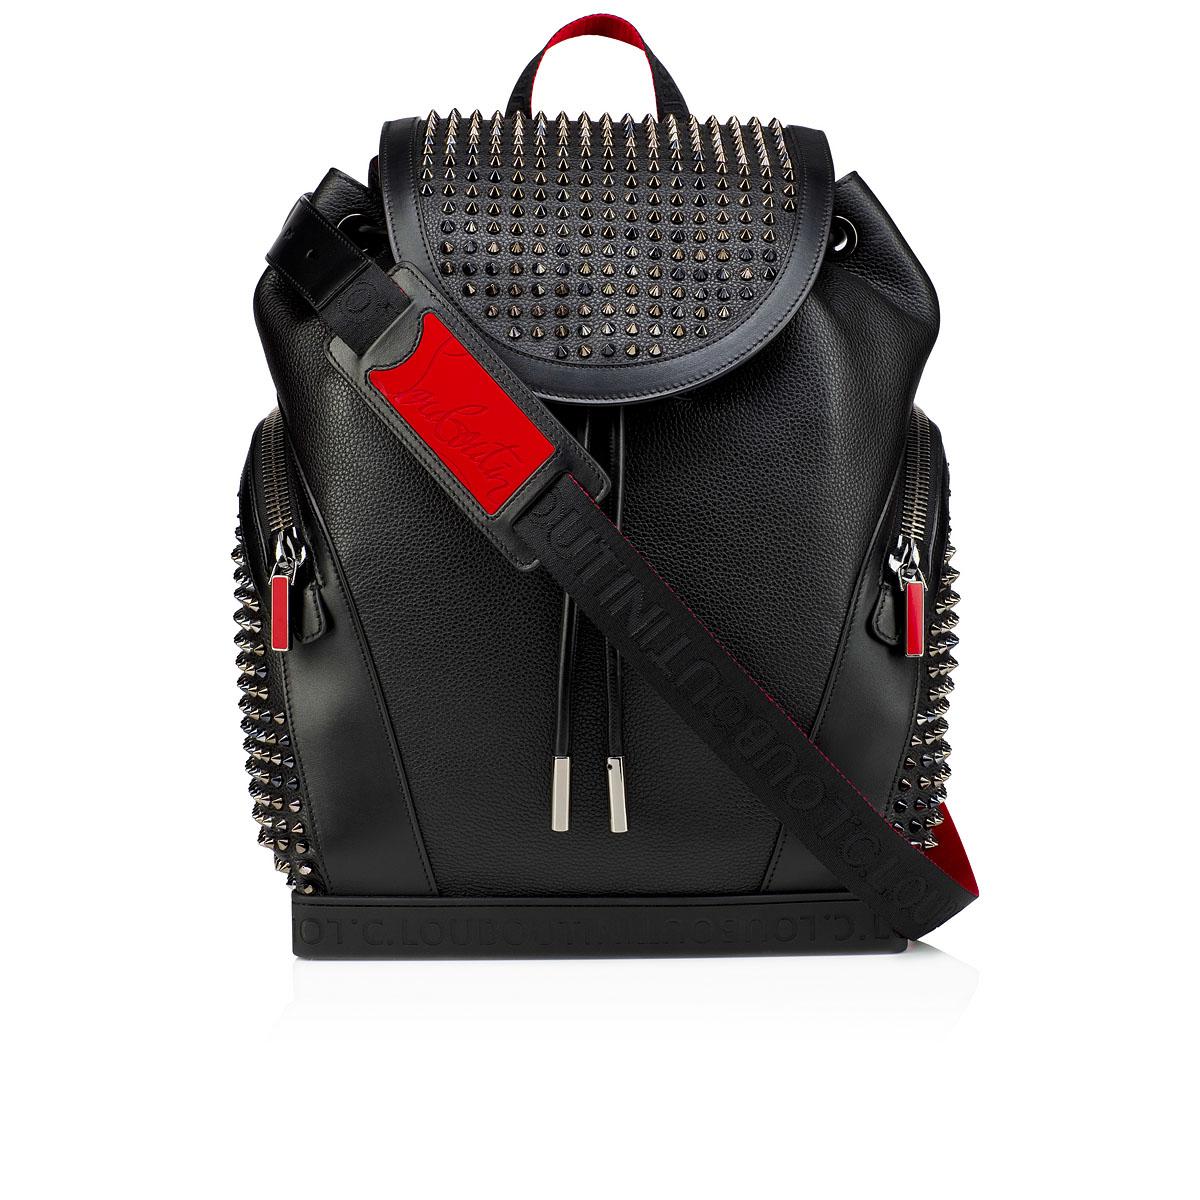 Explorafunk - Backpack - Grained calf leather - Black - Christian 